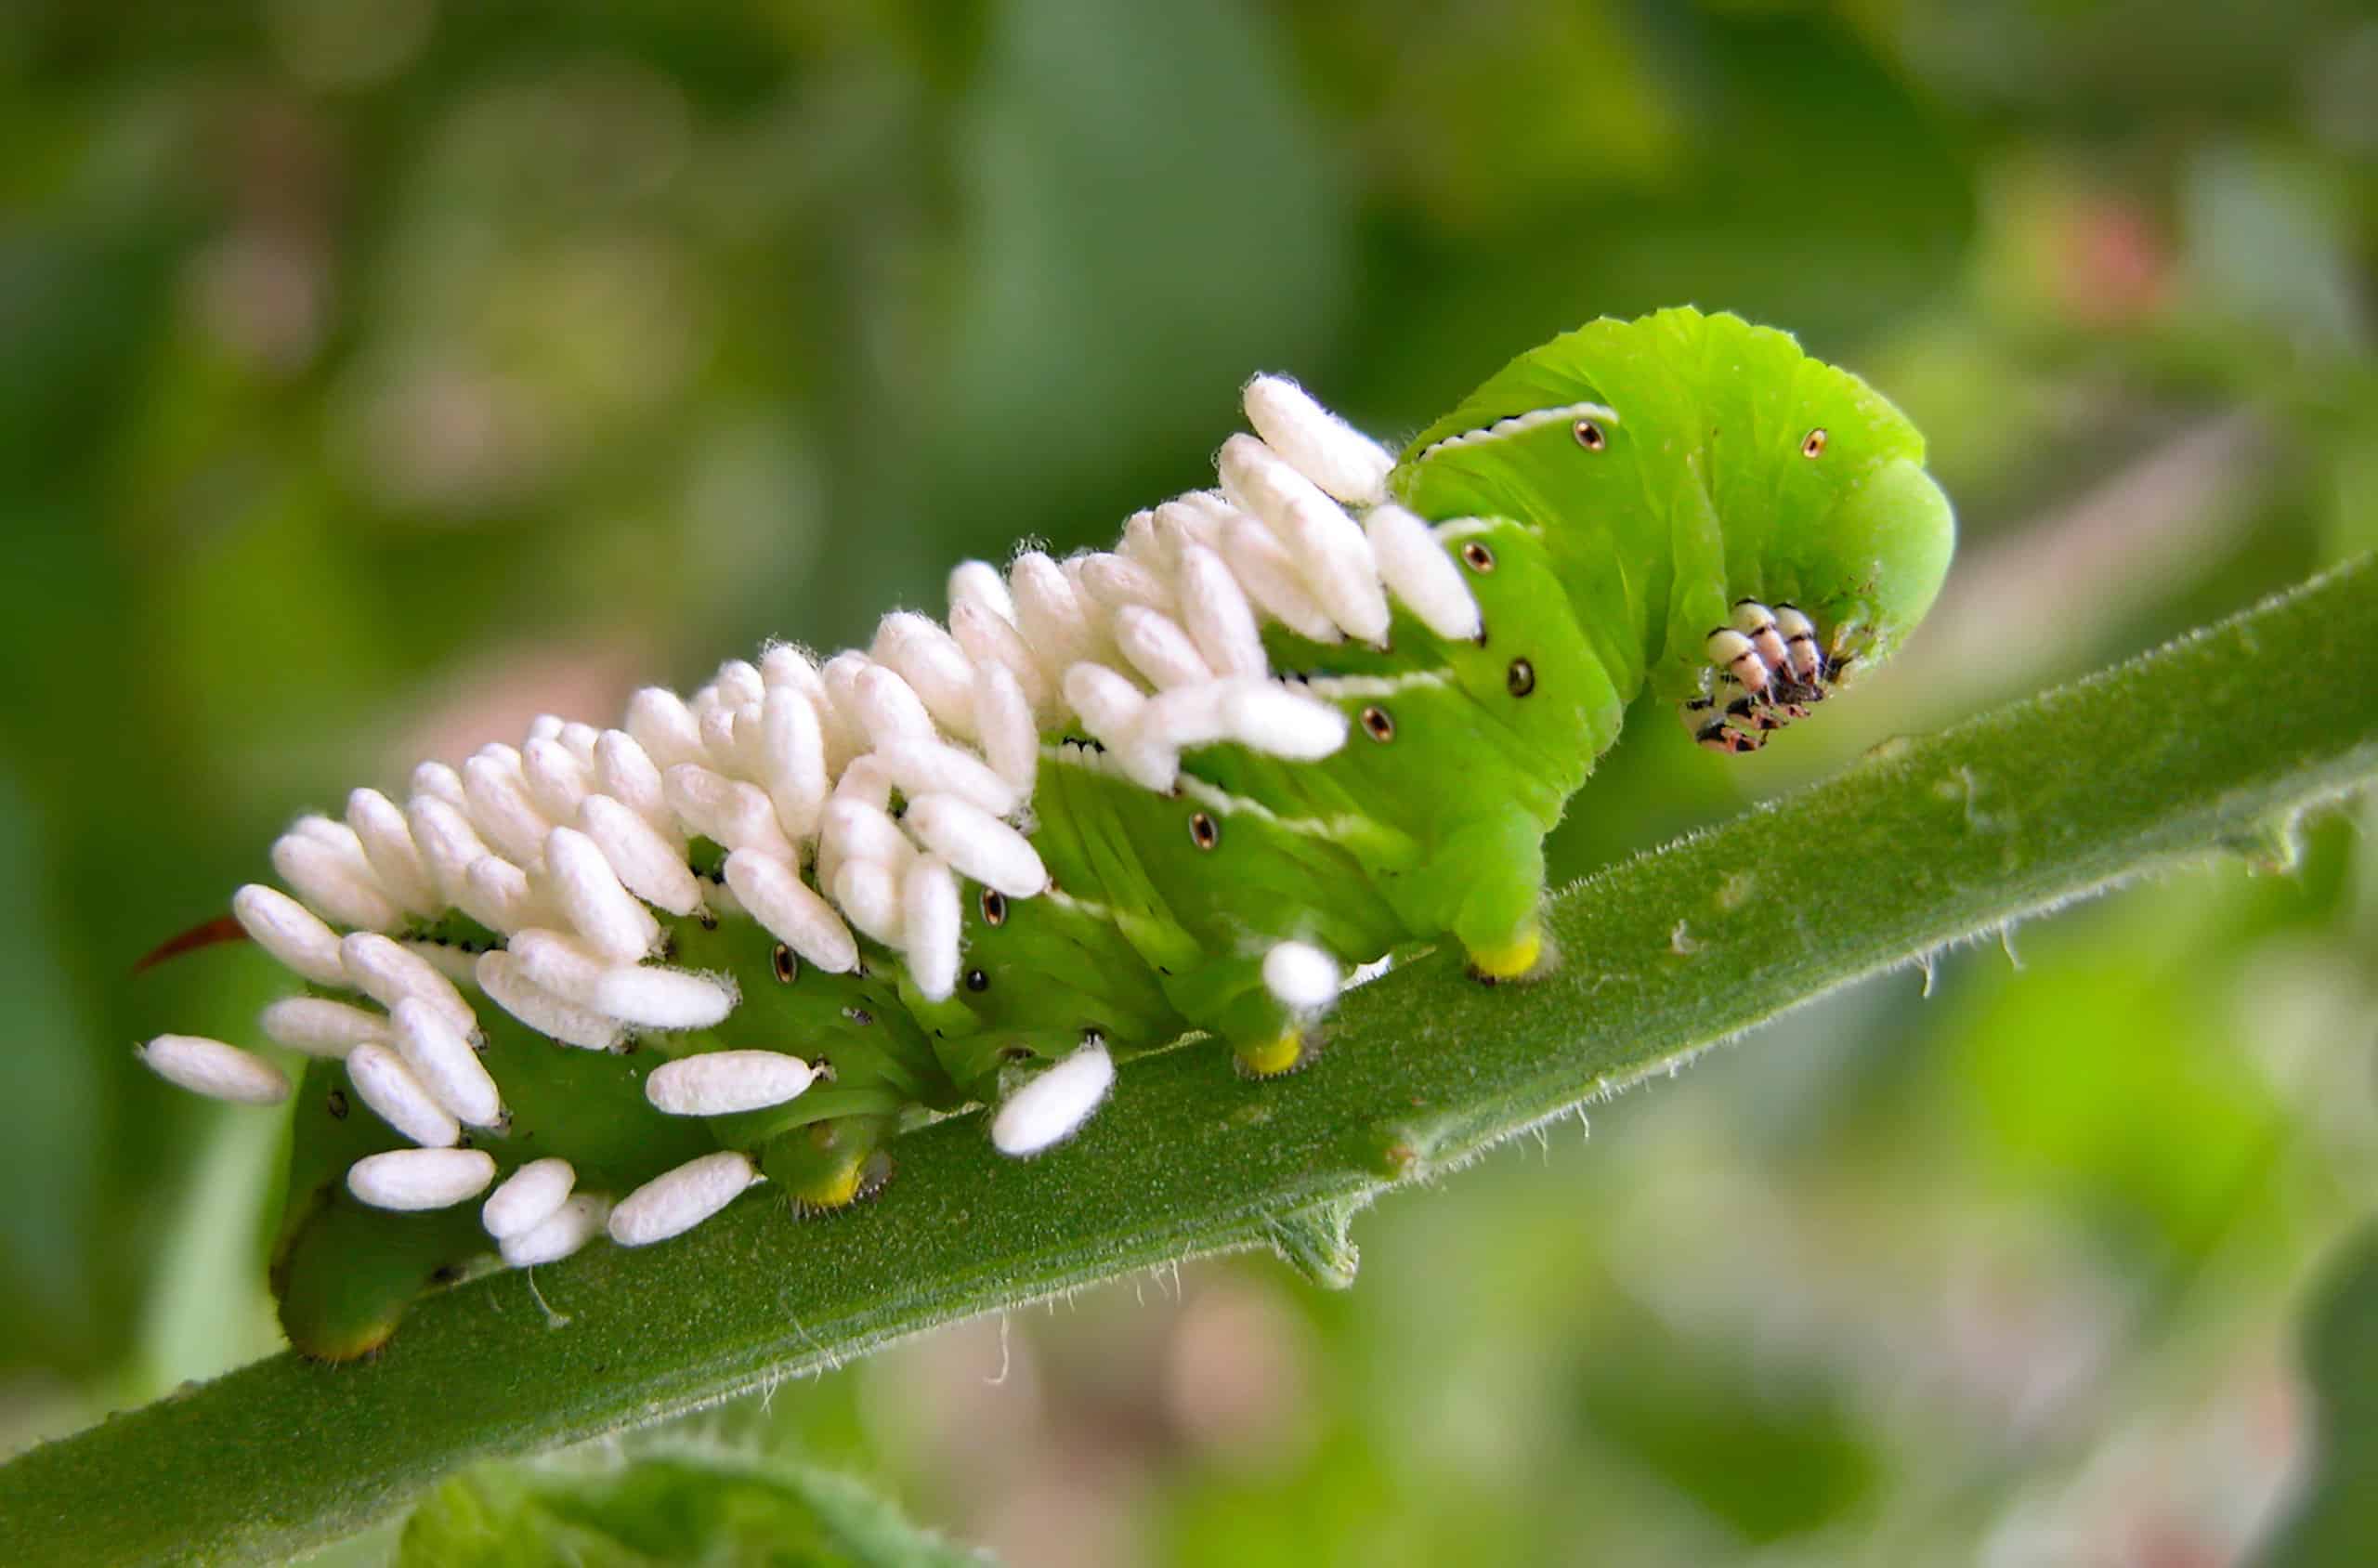 tomato hornworm with wasp eggs